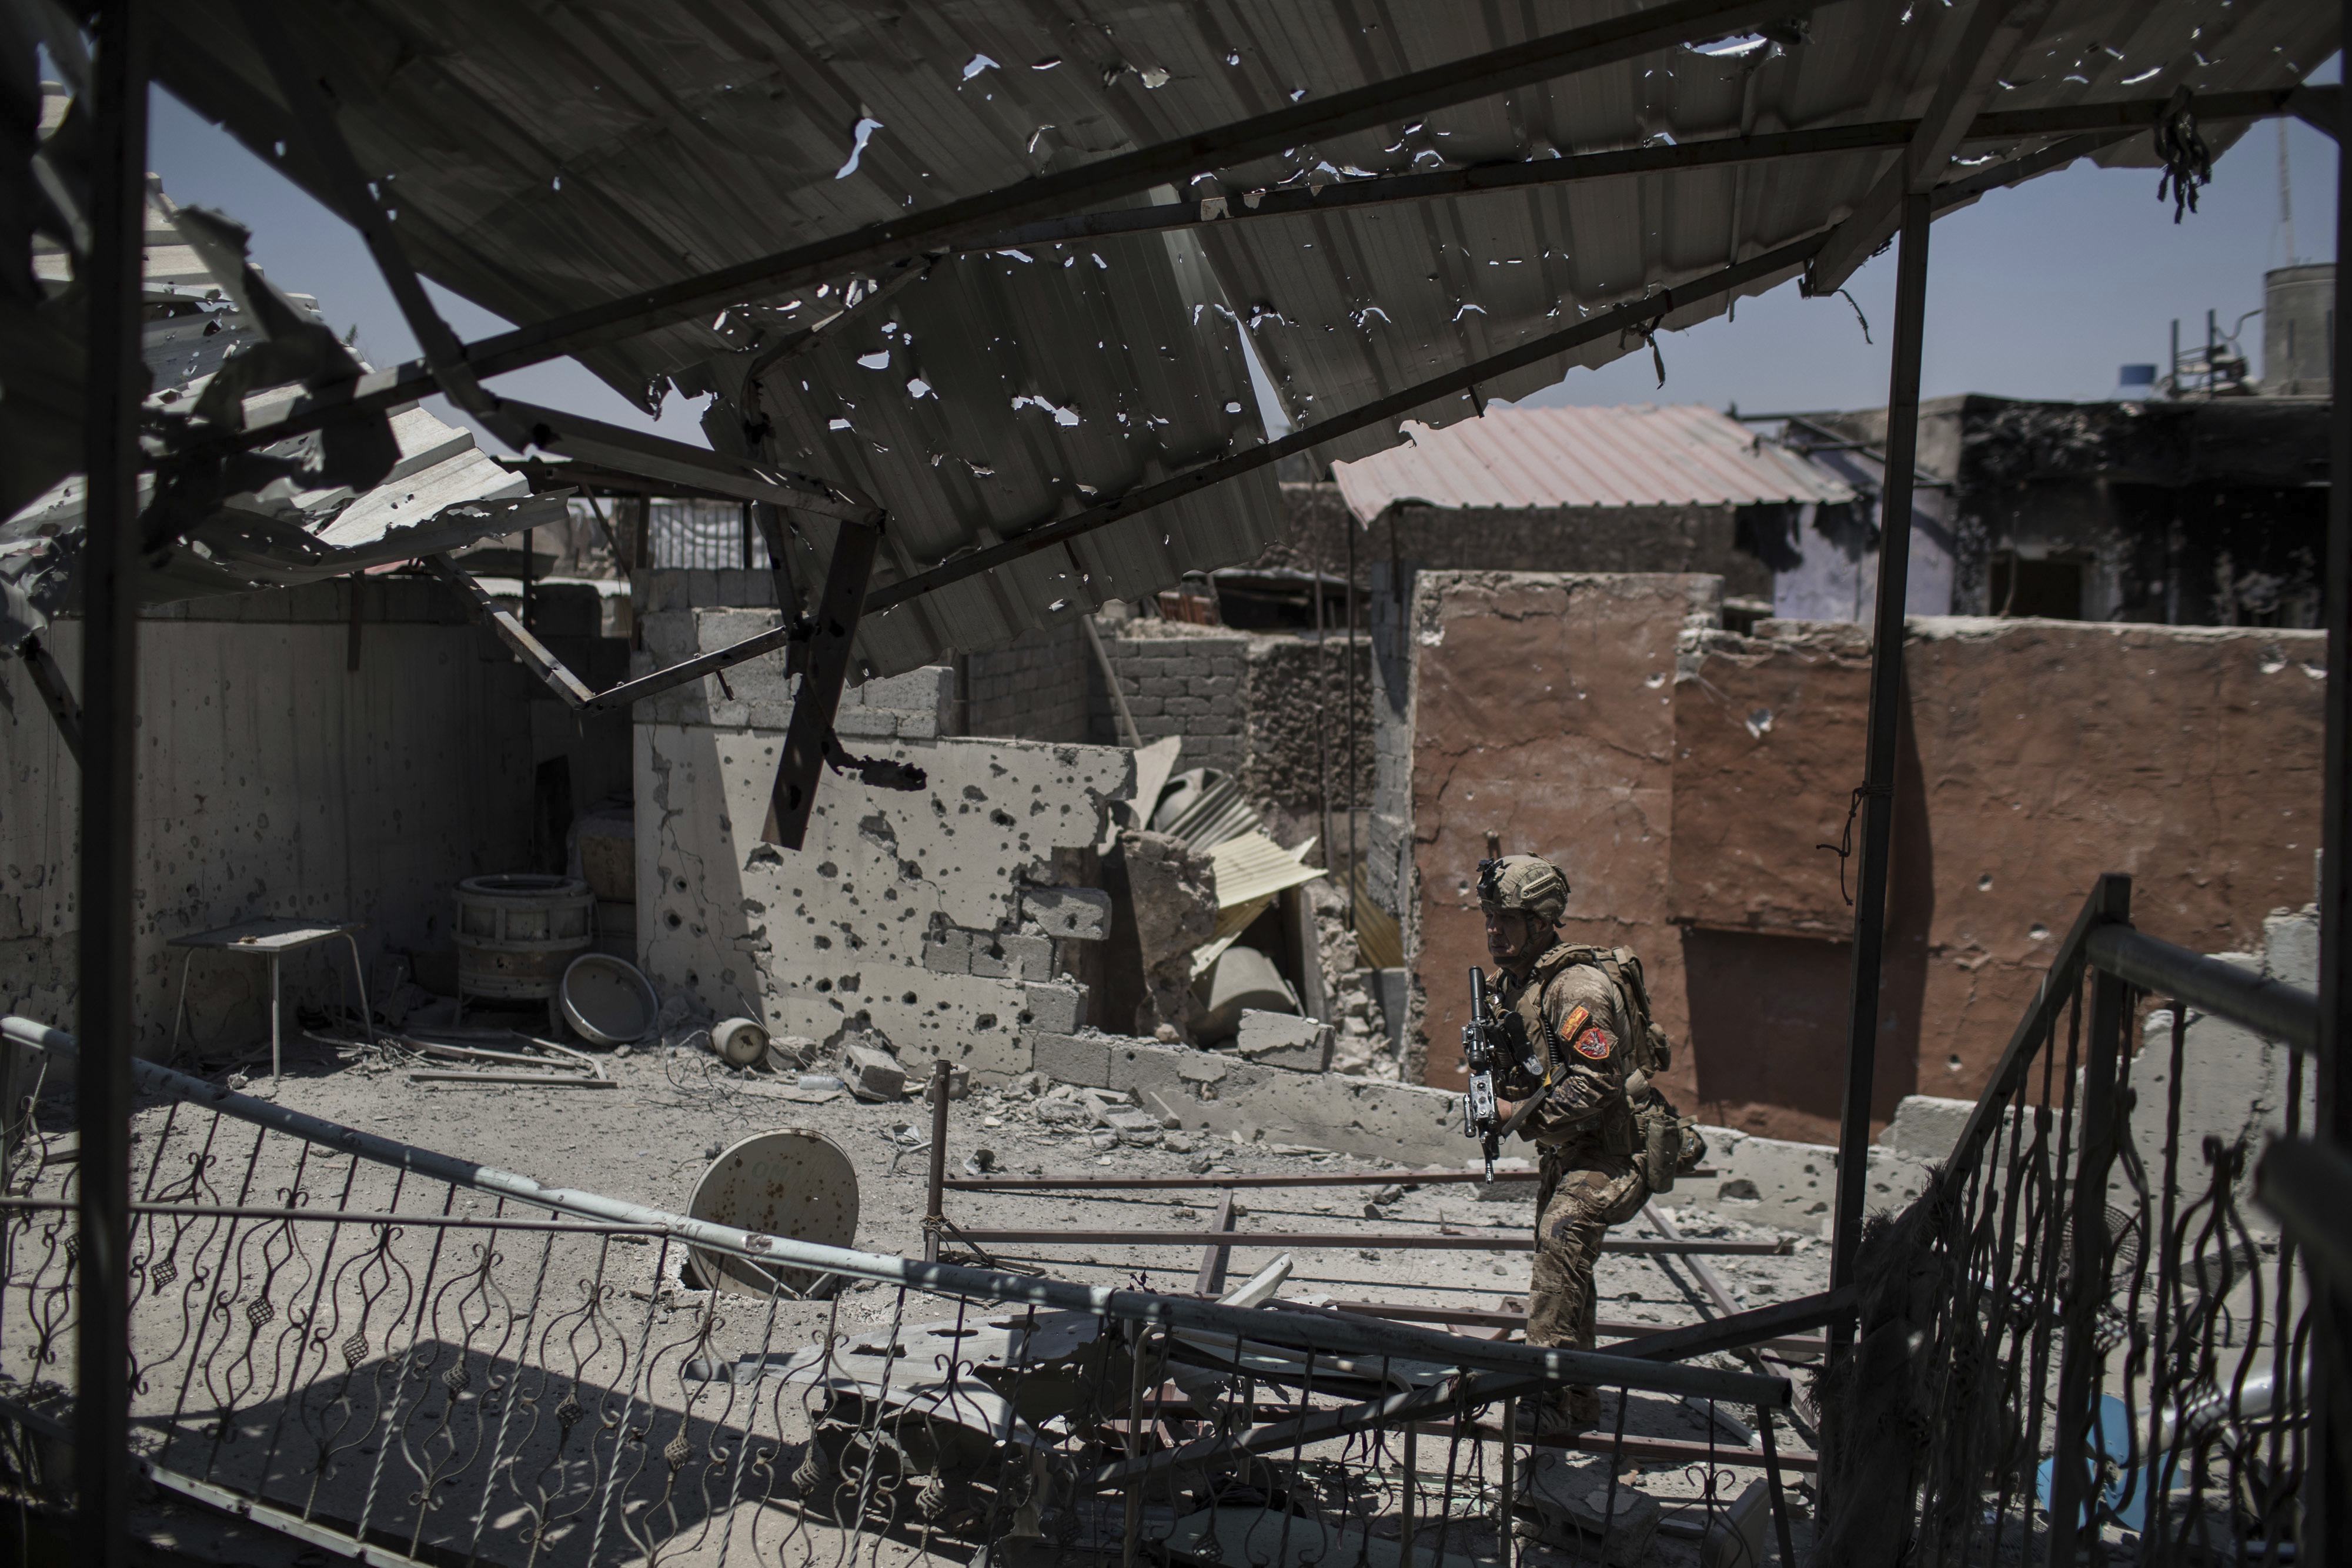 An Iraqi special forces soldier walks by a damaged house during fighting against Islamic State militants in the Old City of Mosul, Iraq, Tuesday, June 27, 2017. An Iraqi officer says counterattacks by Islamic State militants on the western edge of Mosul have stalled Iraqi forces' push in the Old City _ the last IS stronghold in the city. (AP Photo/Felipe Dana)